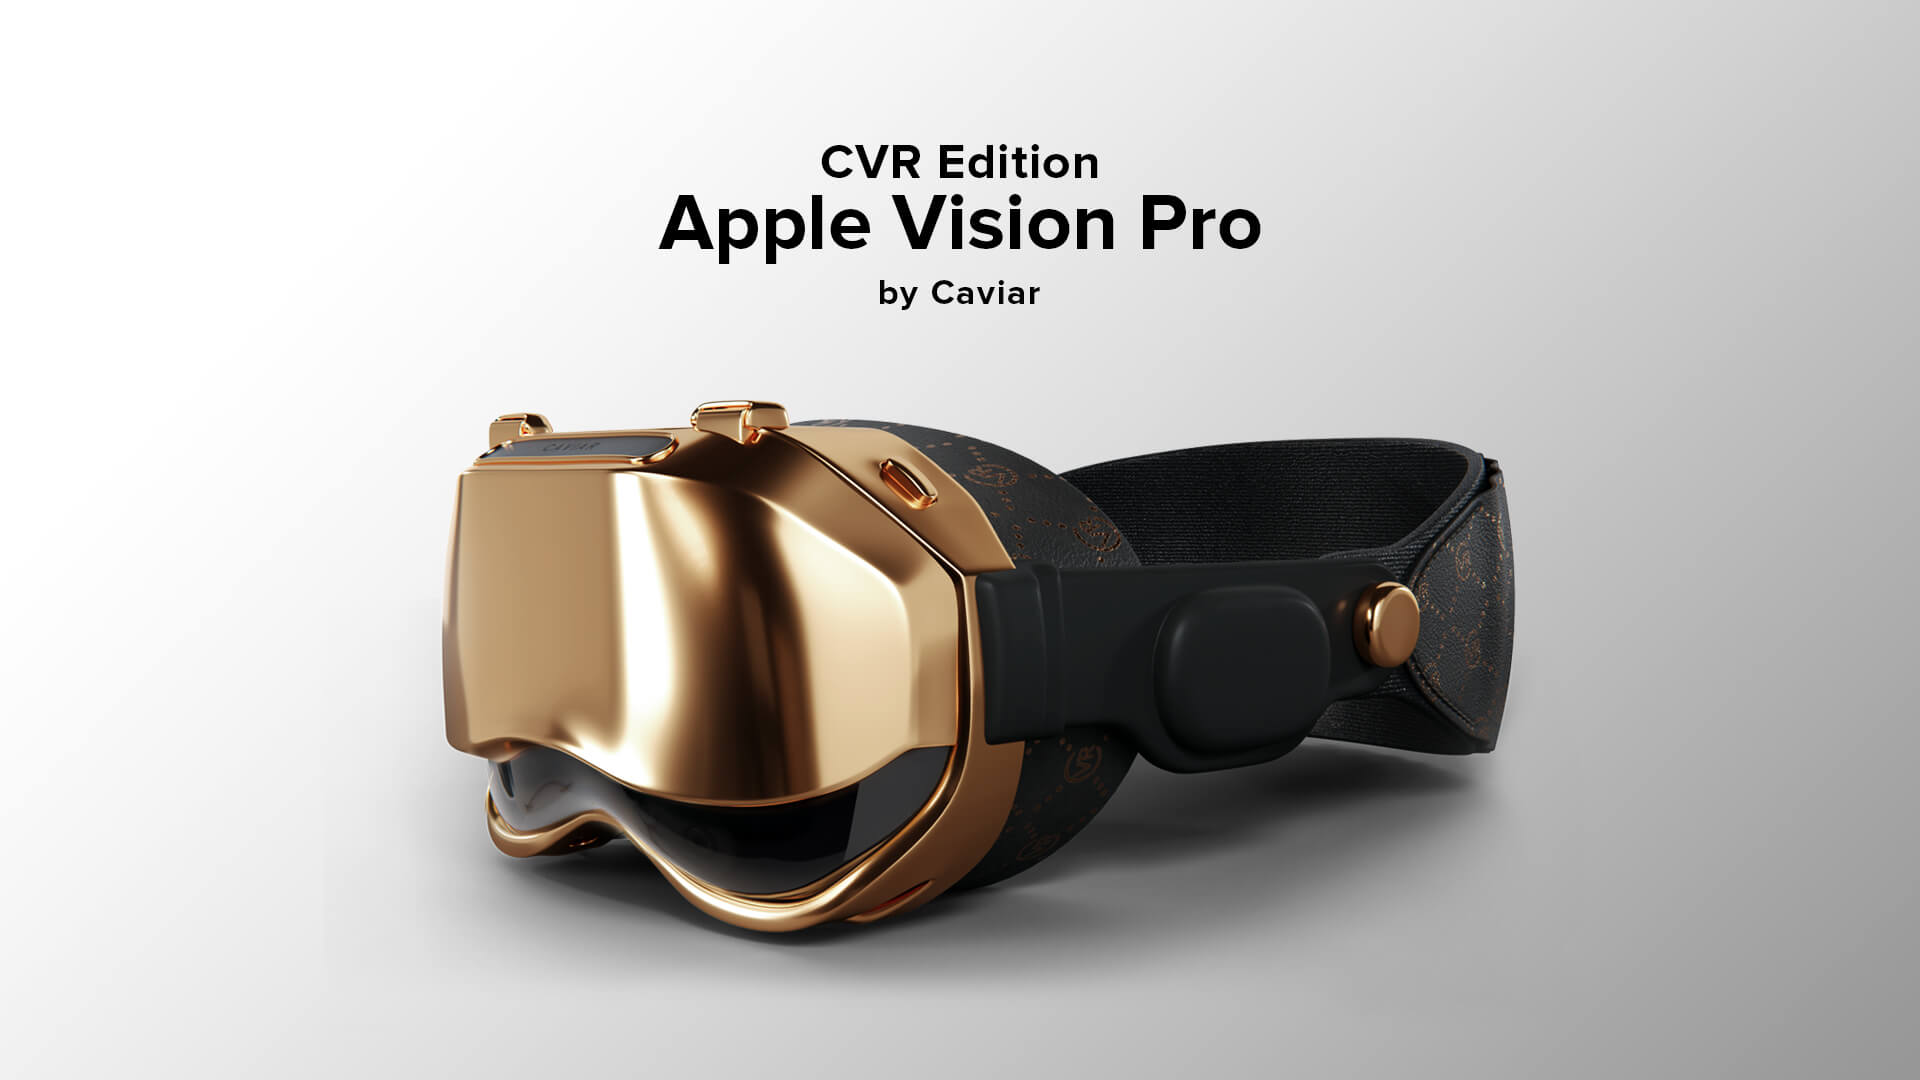 Caviar presents the custom Apple Vision Pro decorated with 18K gold and fine leather